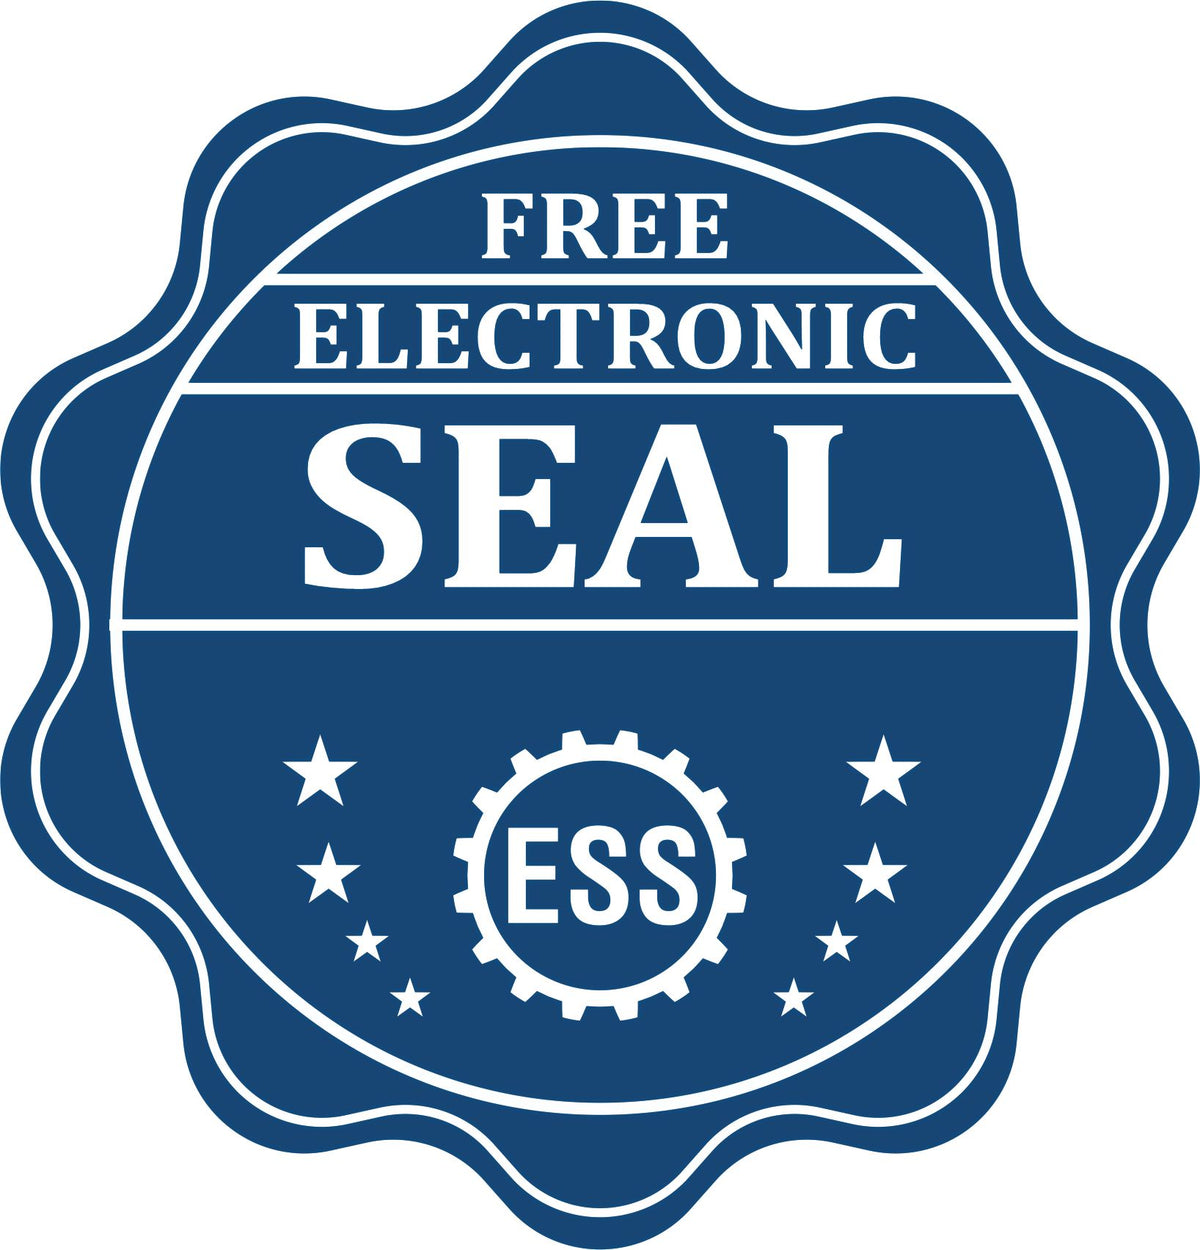 A badge showing a free electronic seal for the Slim Pre-Inked Illinois Architect Seal Stamp with stars and the ESS gear on the emblem.